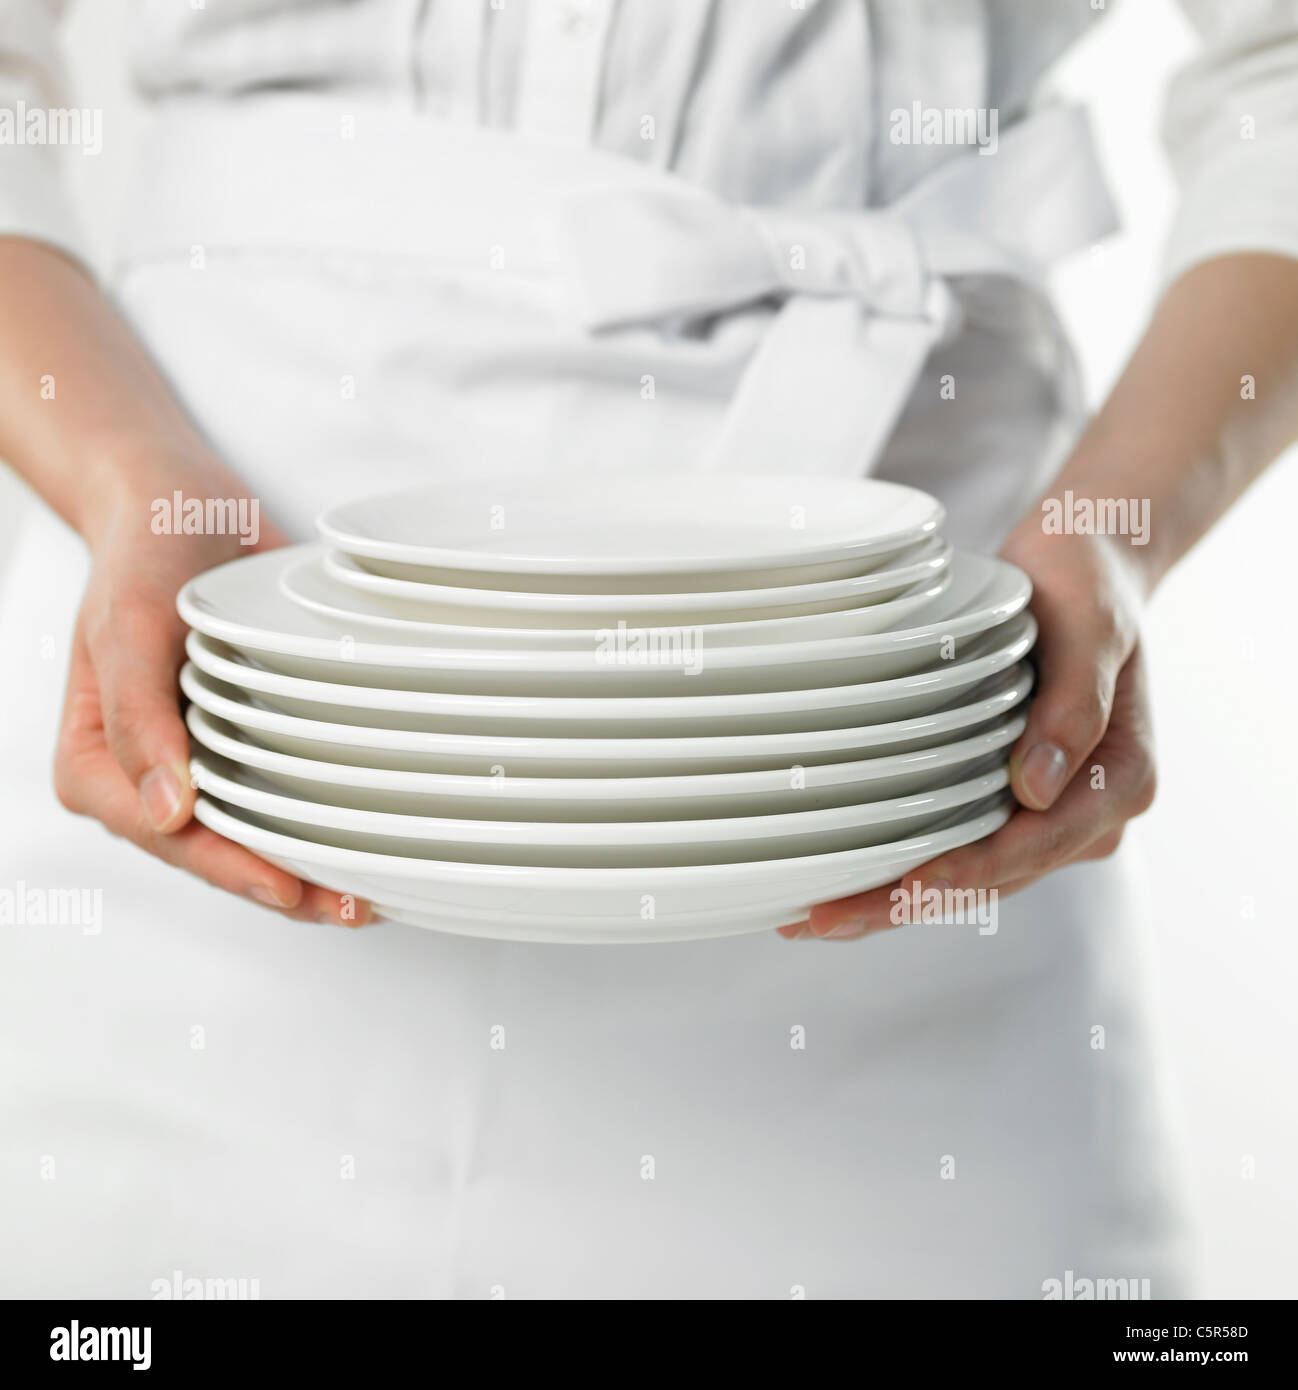 A person holding pile of dishes Stock Photo